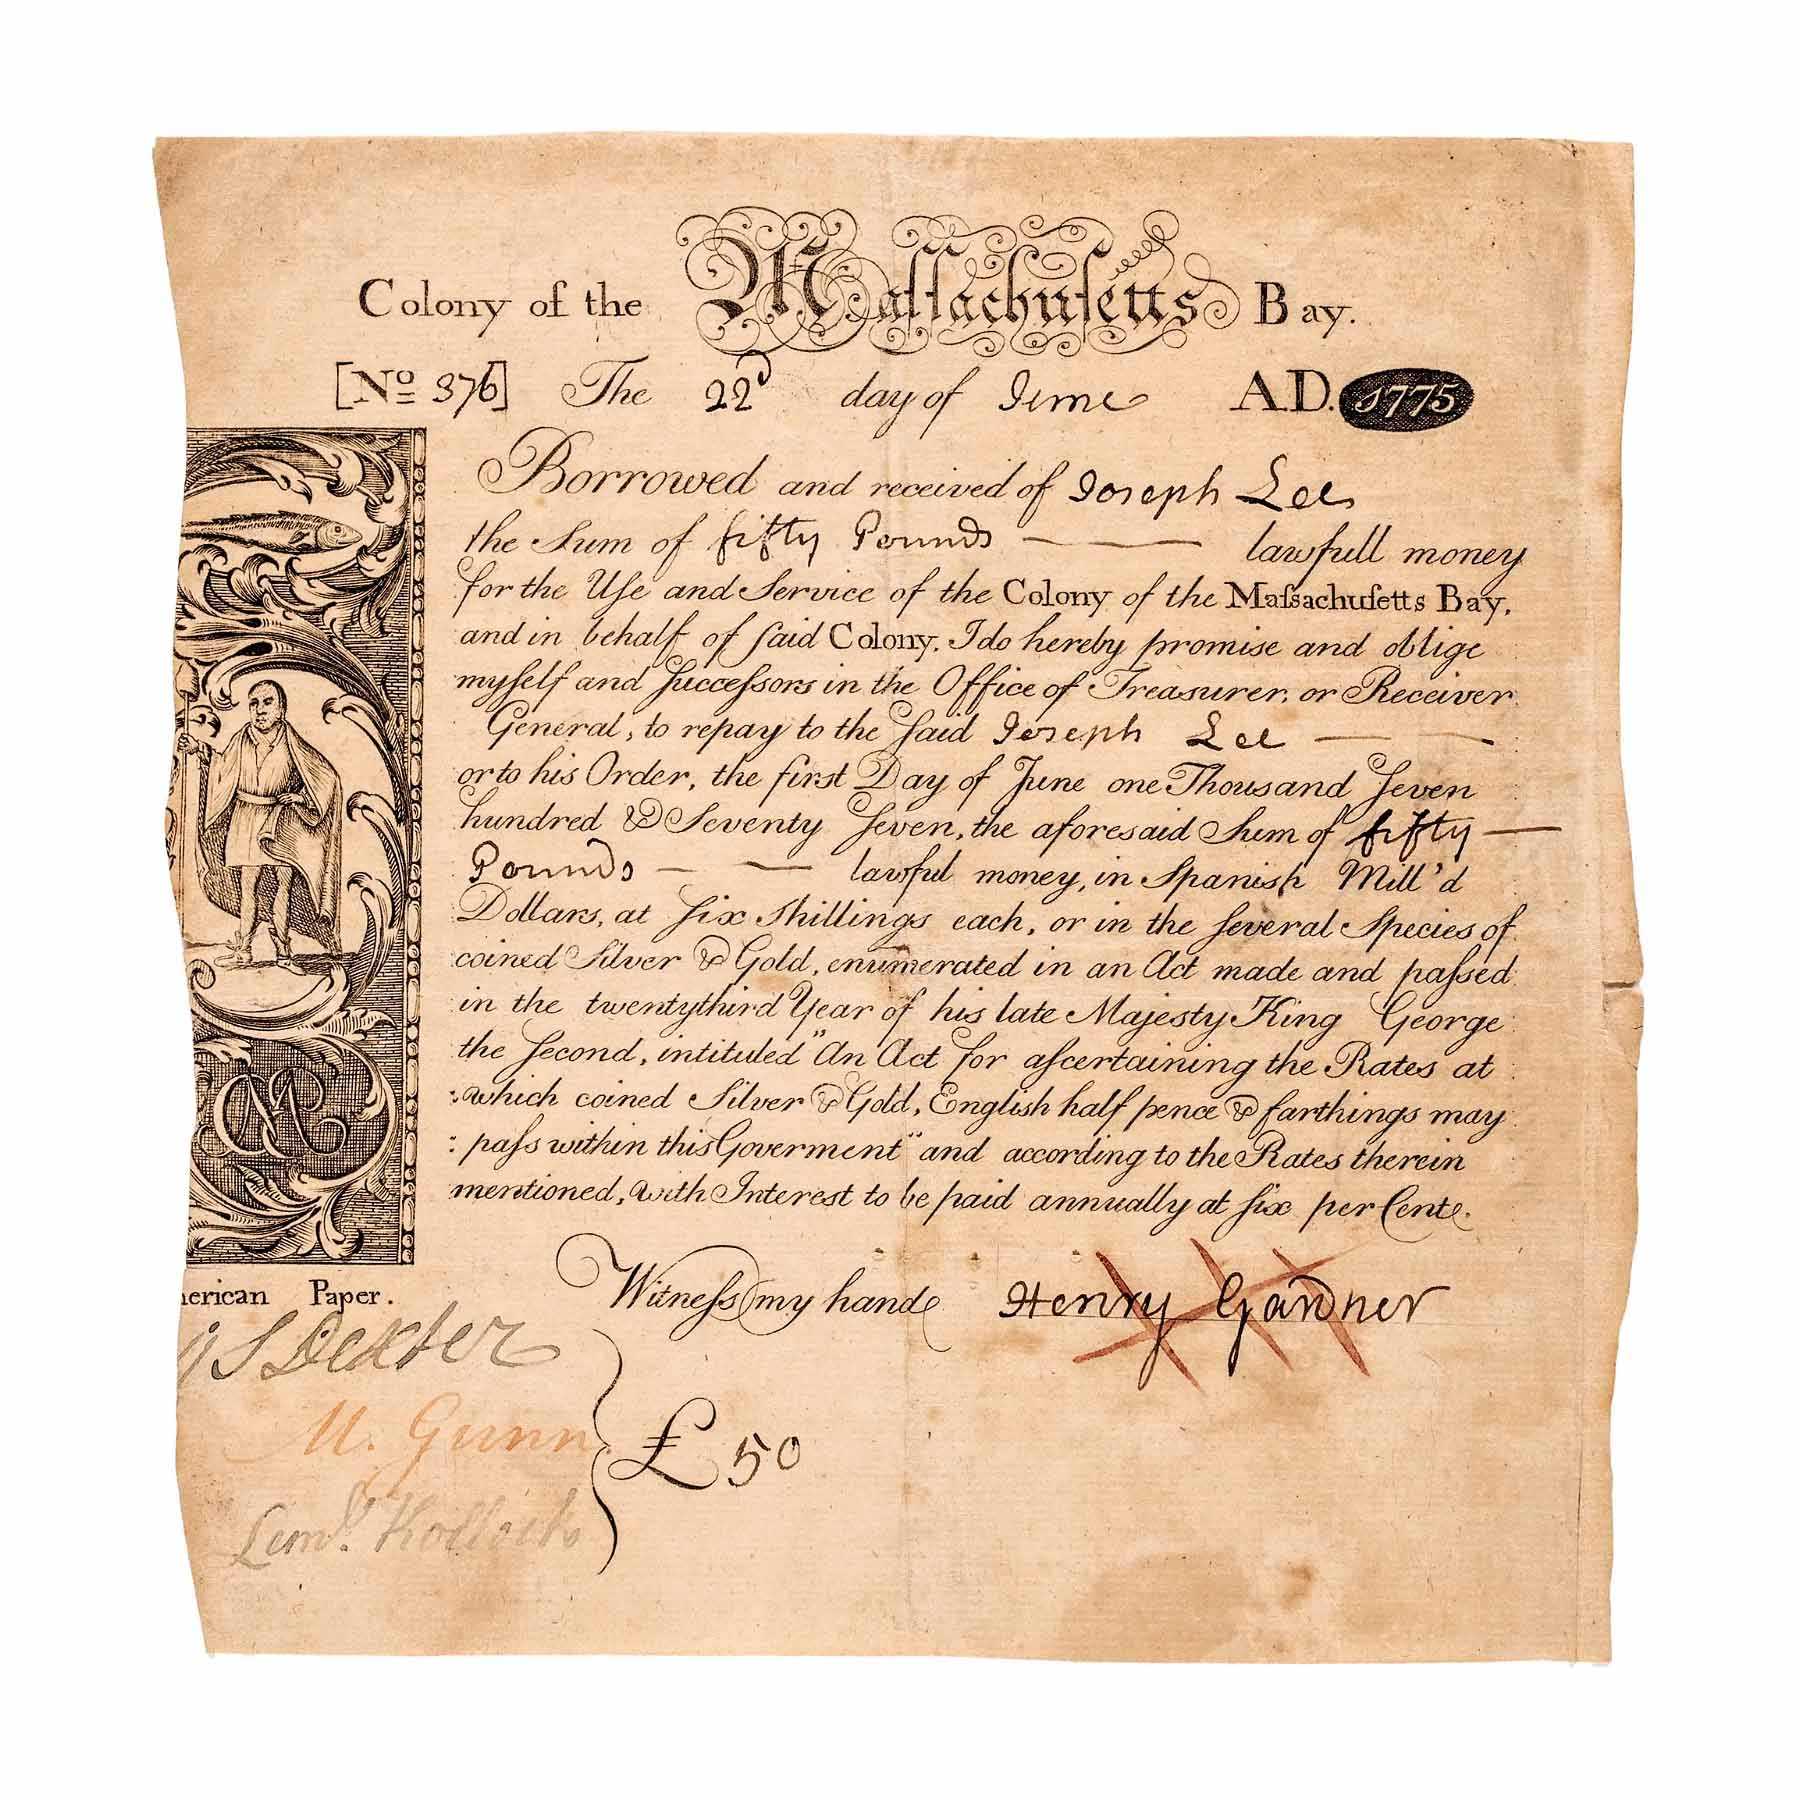 Paul Revere, 'King Philip' Bond signed by Boston Tea Party Participant Captain Joseph Lee, estimated at $20,000-$30,000 at Early American History Auctions.